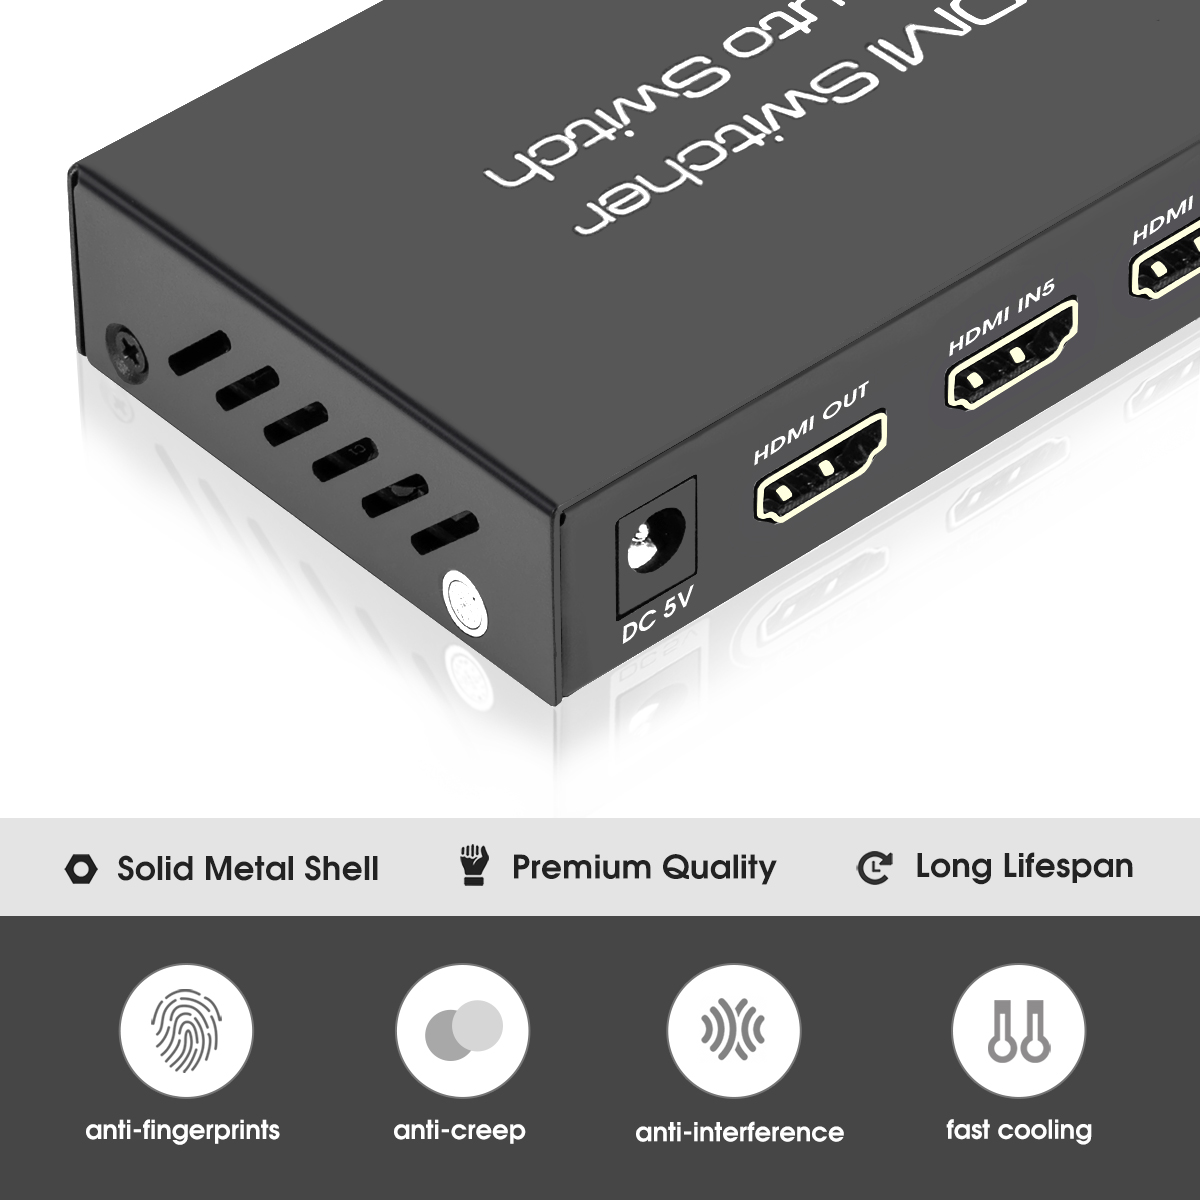 ROOFULL 5 Port 4K HDMI Switch with Remote Premium 5 in 1 Out 4K@60Hz  HDMI2.0 Switcher Selector, Support HDR 10, HDCP 2.2, Dolby Vision/ Atmos,  Auto-Switch, 18Gbps, CEC, 1080P/3D – ROOFULL Official Website